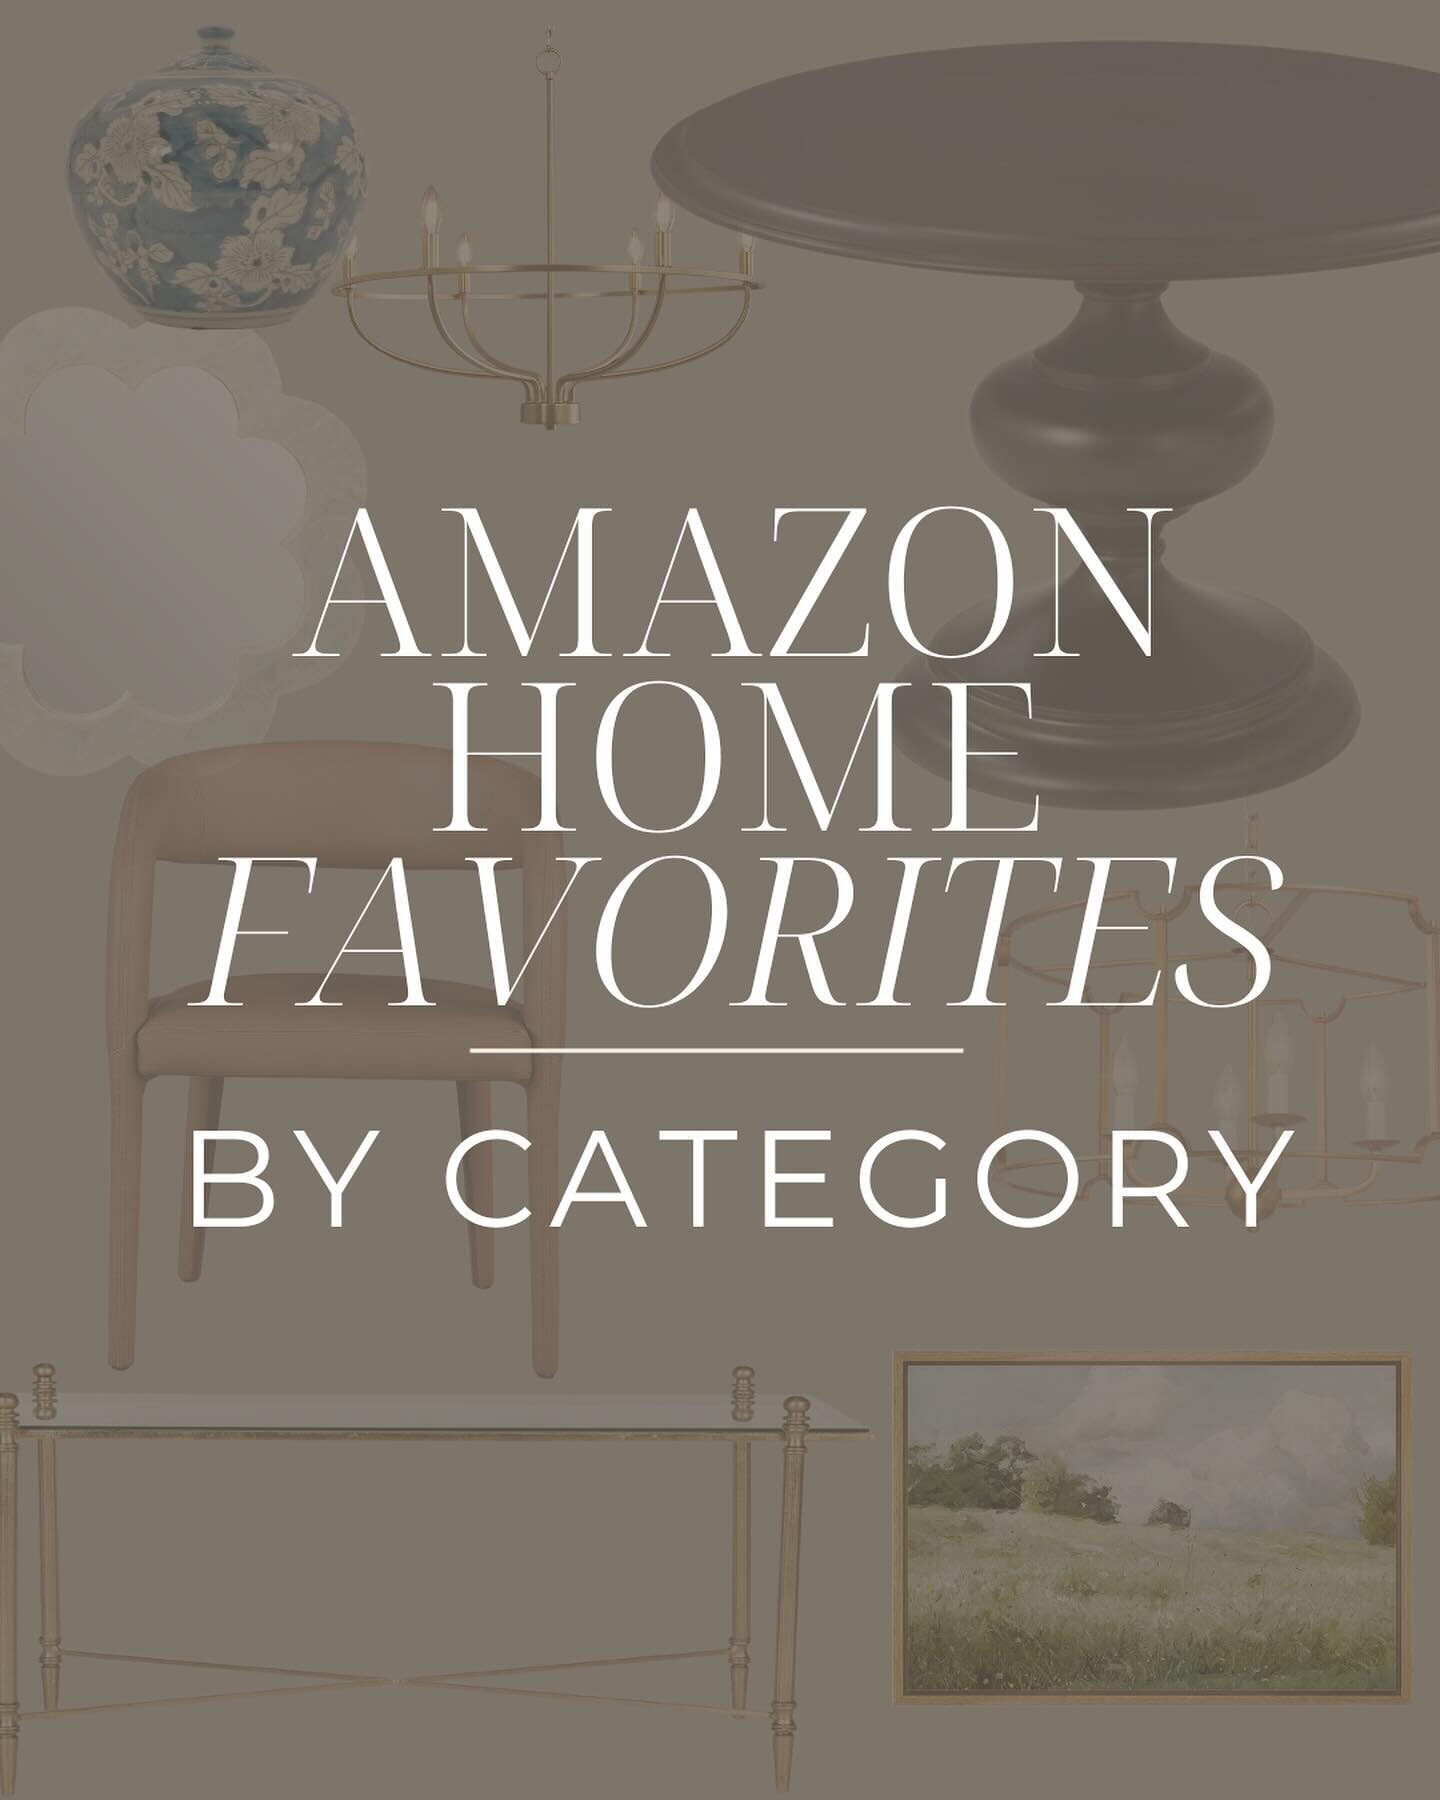 Comment &ldquo;shop&rdquo; and I&rsquo;ll send you a message with the link! I am always digging through the pages of Amazon to source the best home decor for us. You can find all categories on the storefront 👏🏼